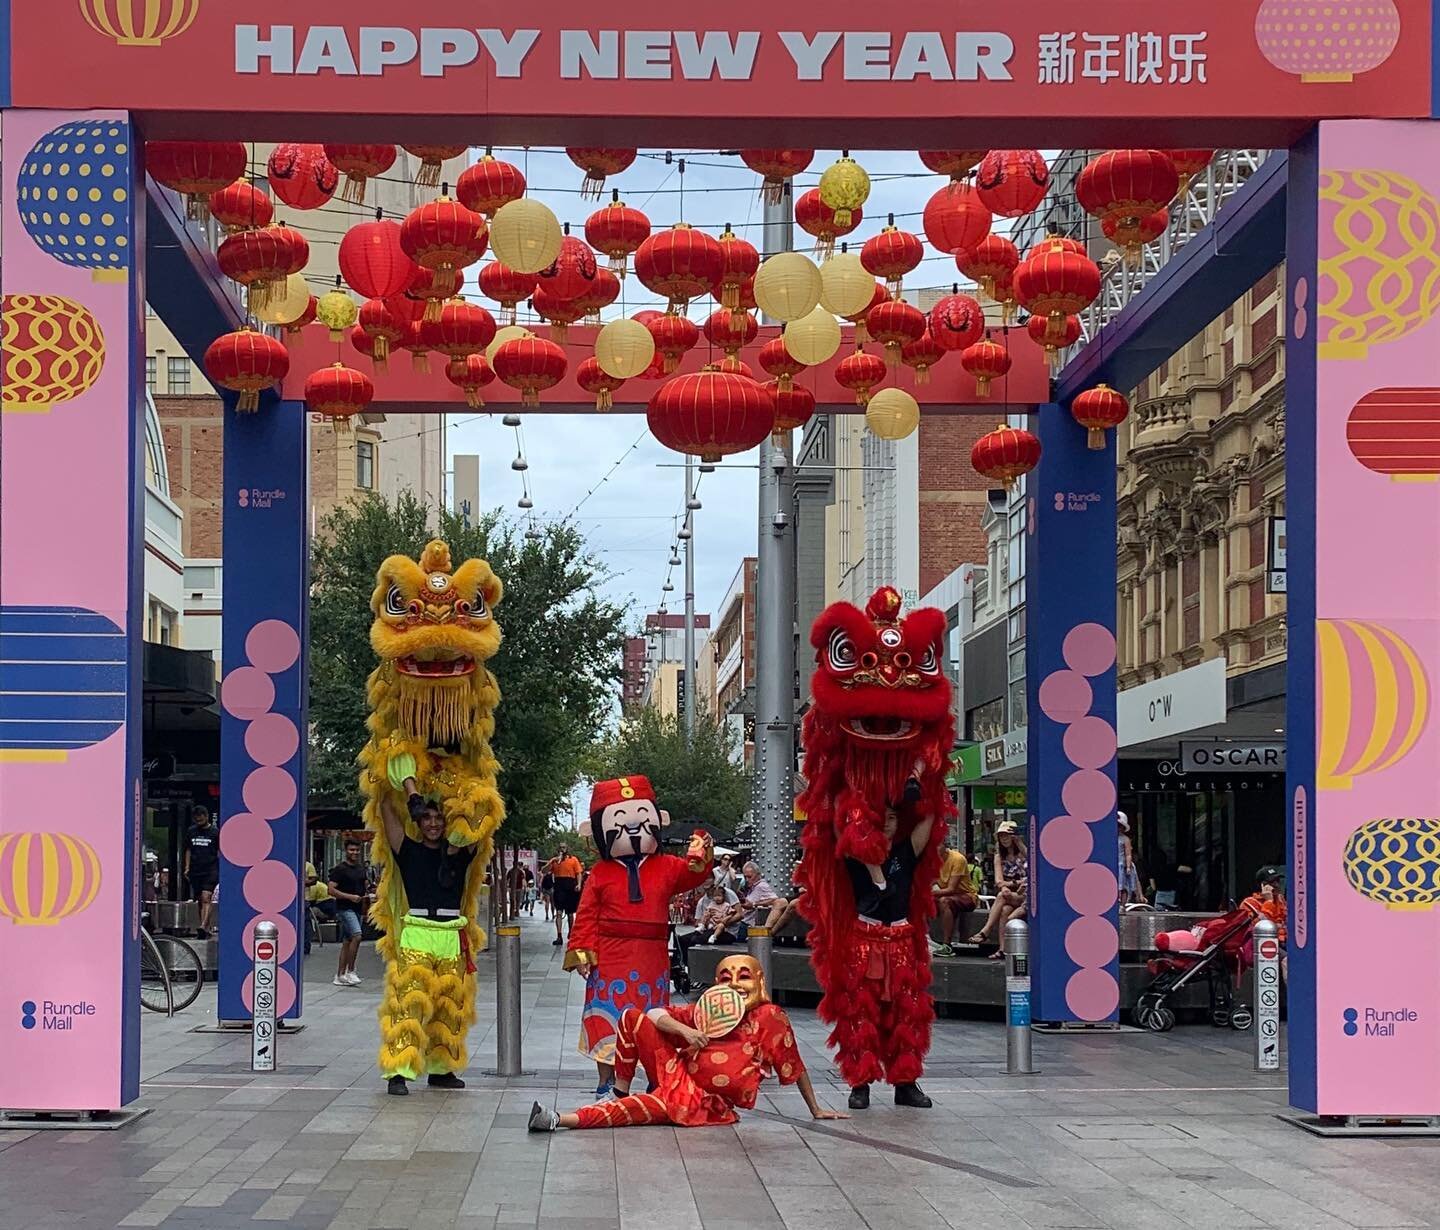 Despite the weather, @rundlemall you were amazing! We couldn&rsquo;t have asked for a better crowd, it was so heart warming to see so many smiles in one day 😍 We wish you all a wonderful and happy Lunar New Year and we hope the lions bring you extra